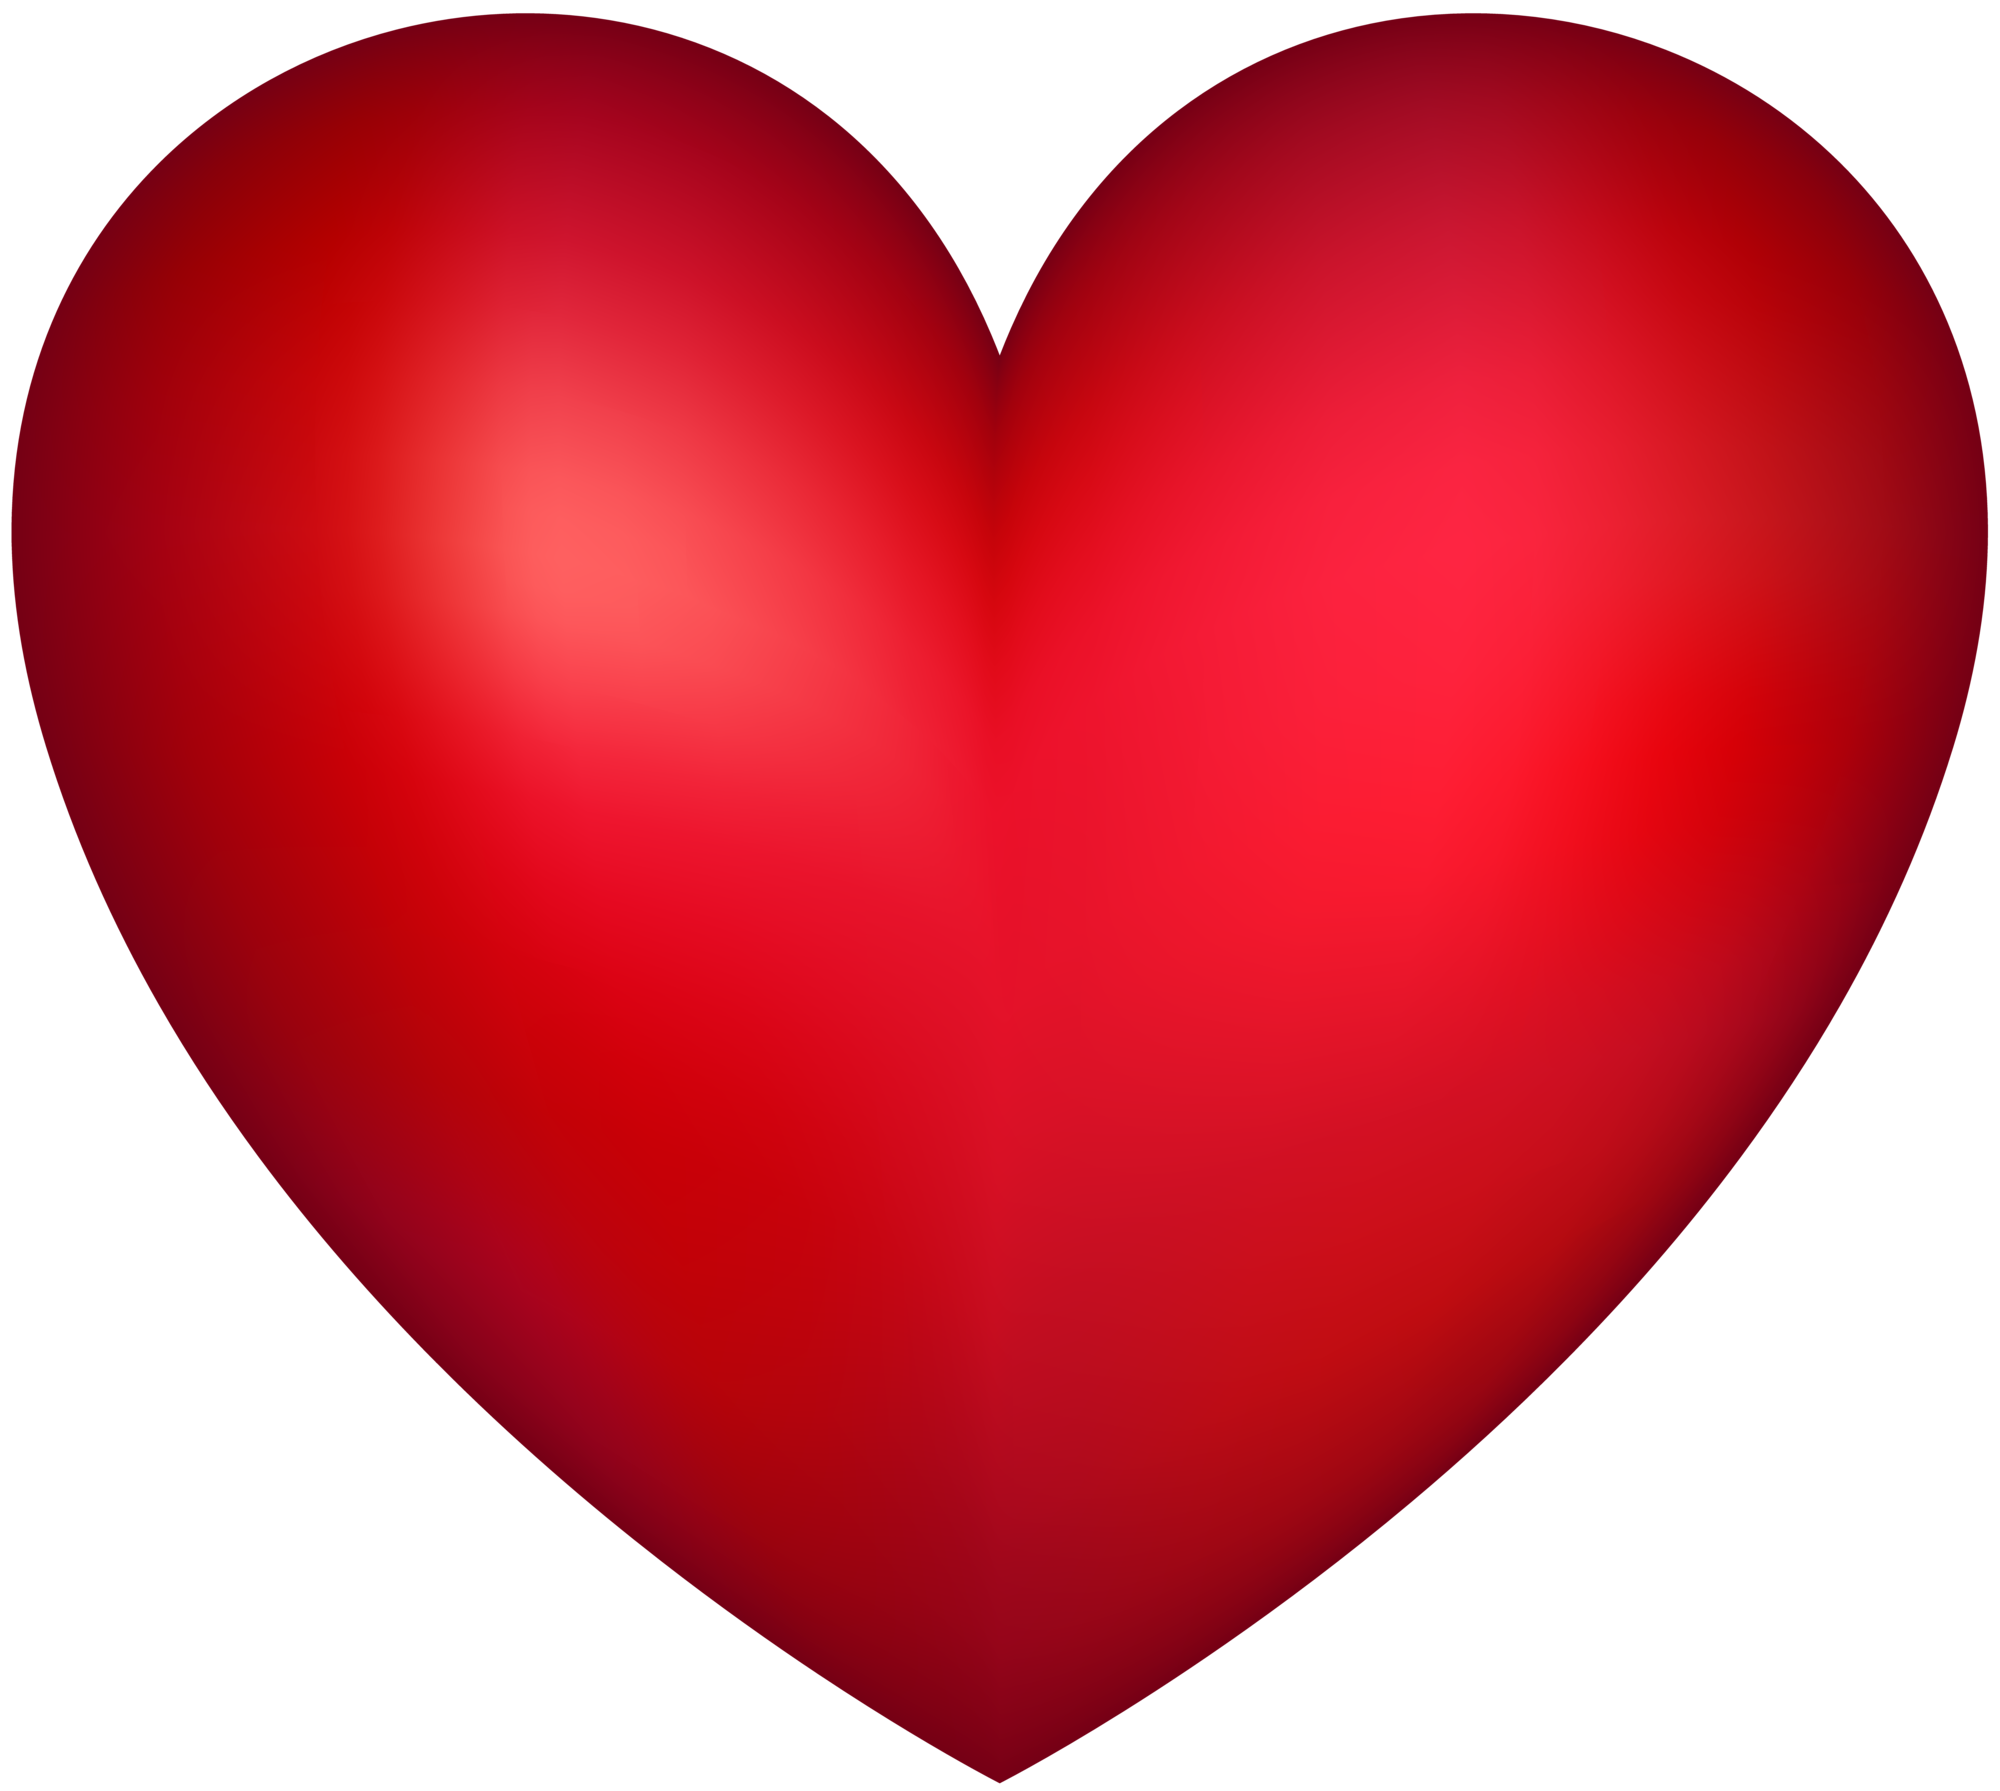 Red Heart Transparent PNG Image 3d